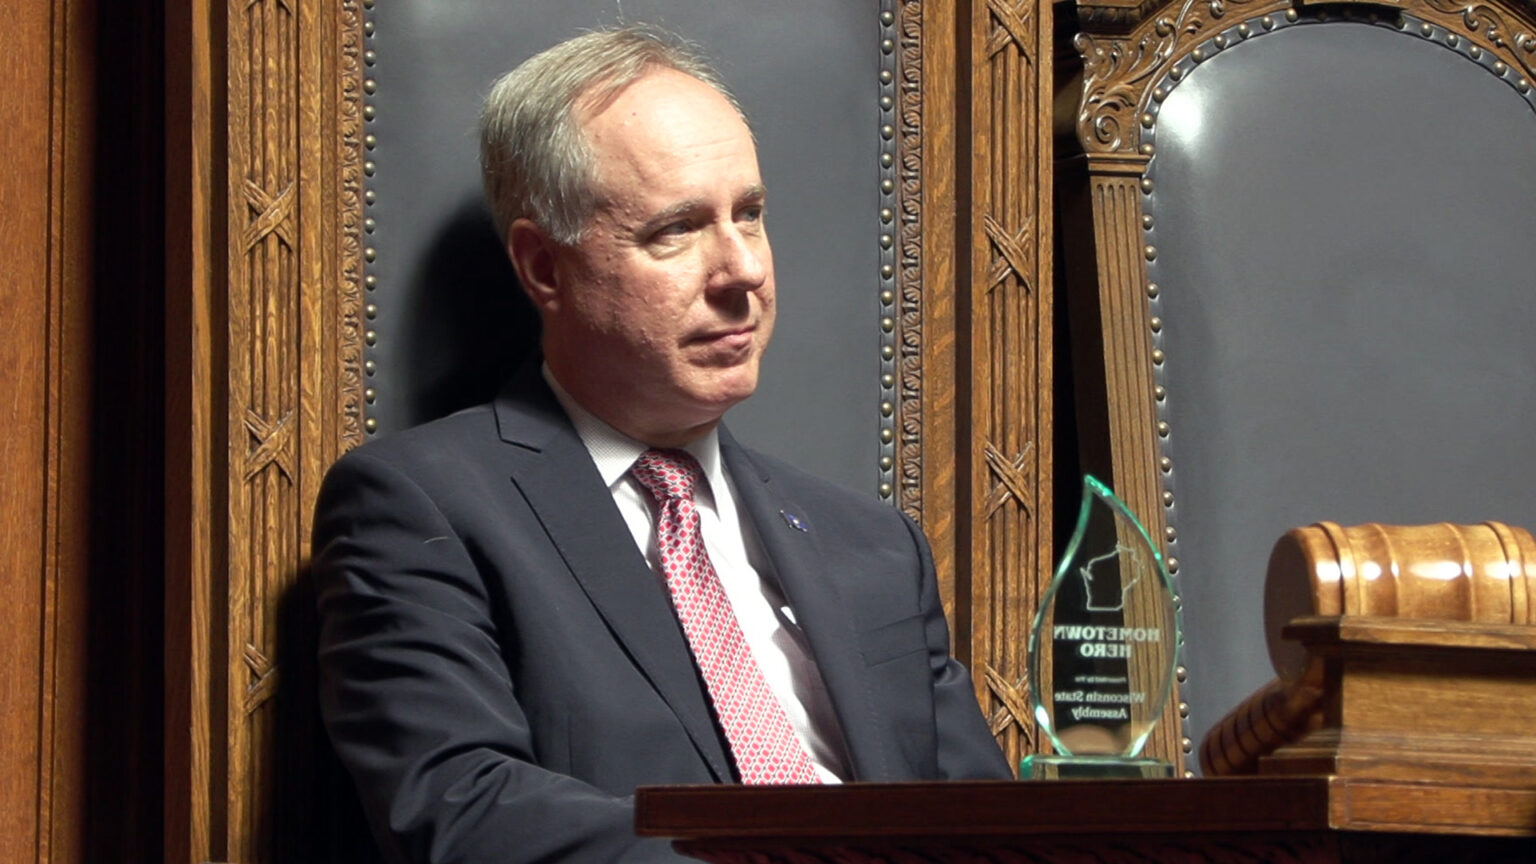 Robin Vos sits in a high-backed leather and wood chair and faces a desk with a glass award and large wood gavel, with another empty chair to his side.